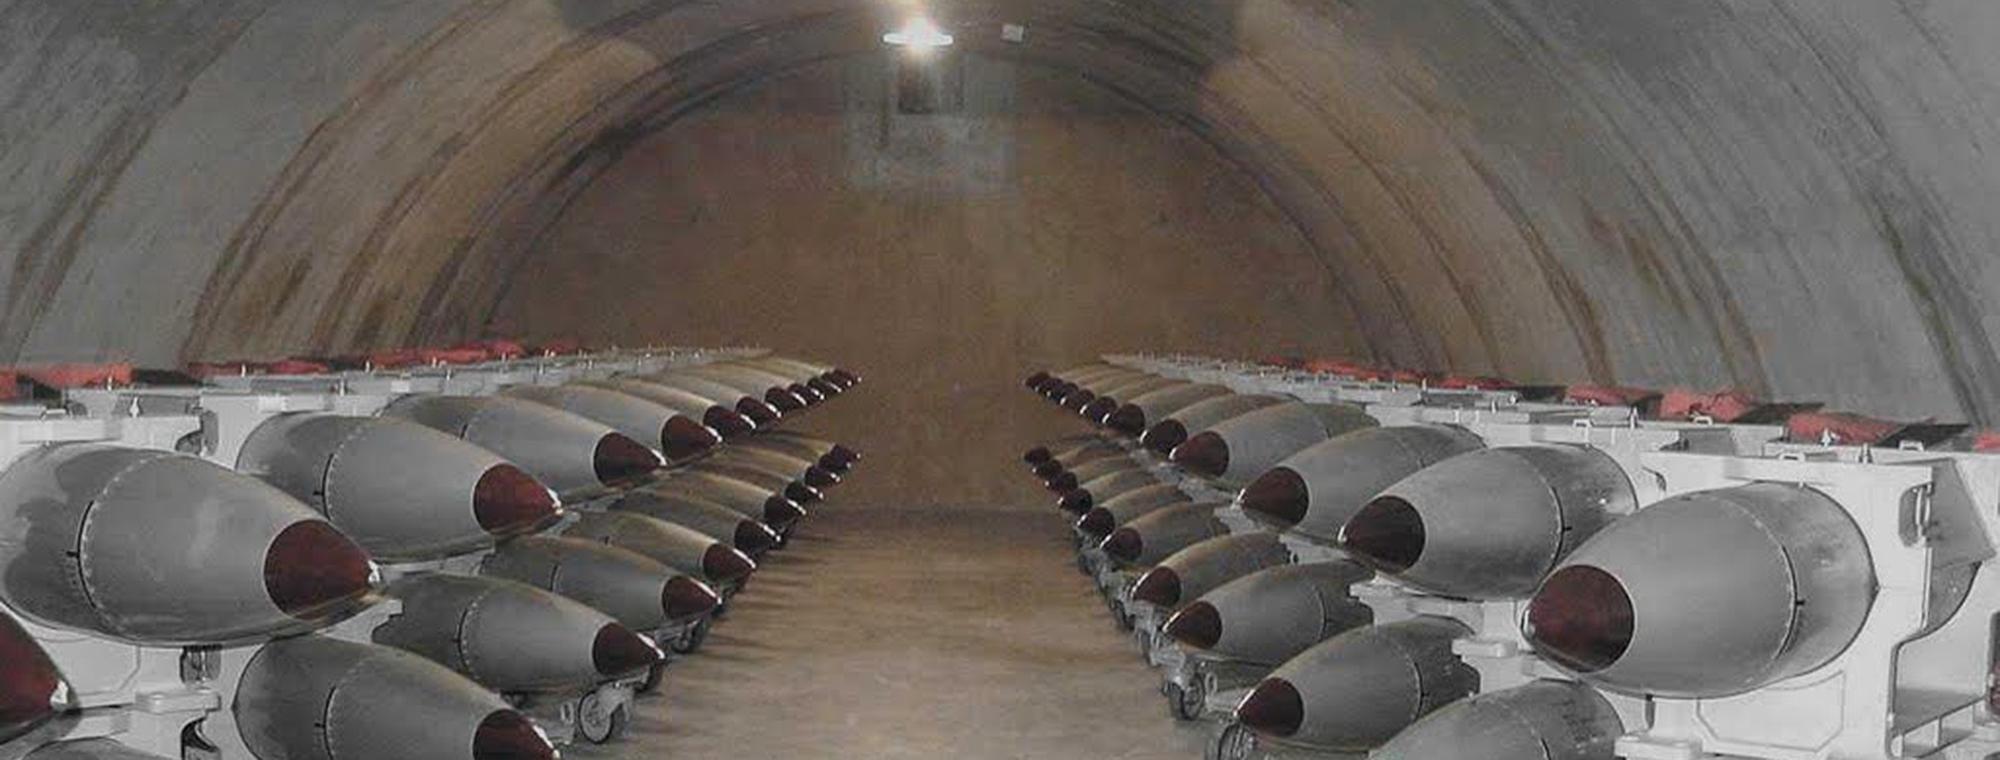 Bring Home US Tactical Nuclear Weapons from Europe | Ploughshares Fund